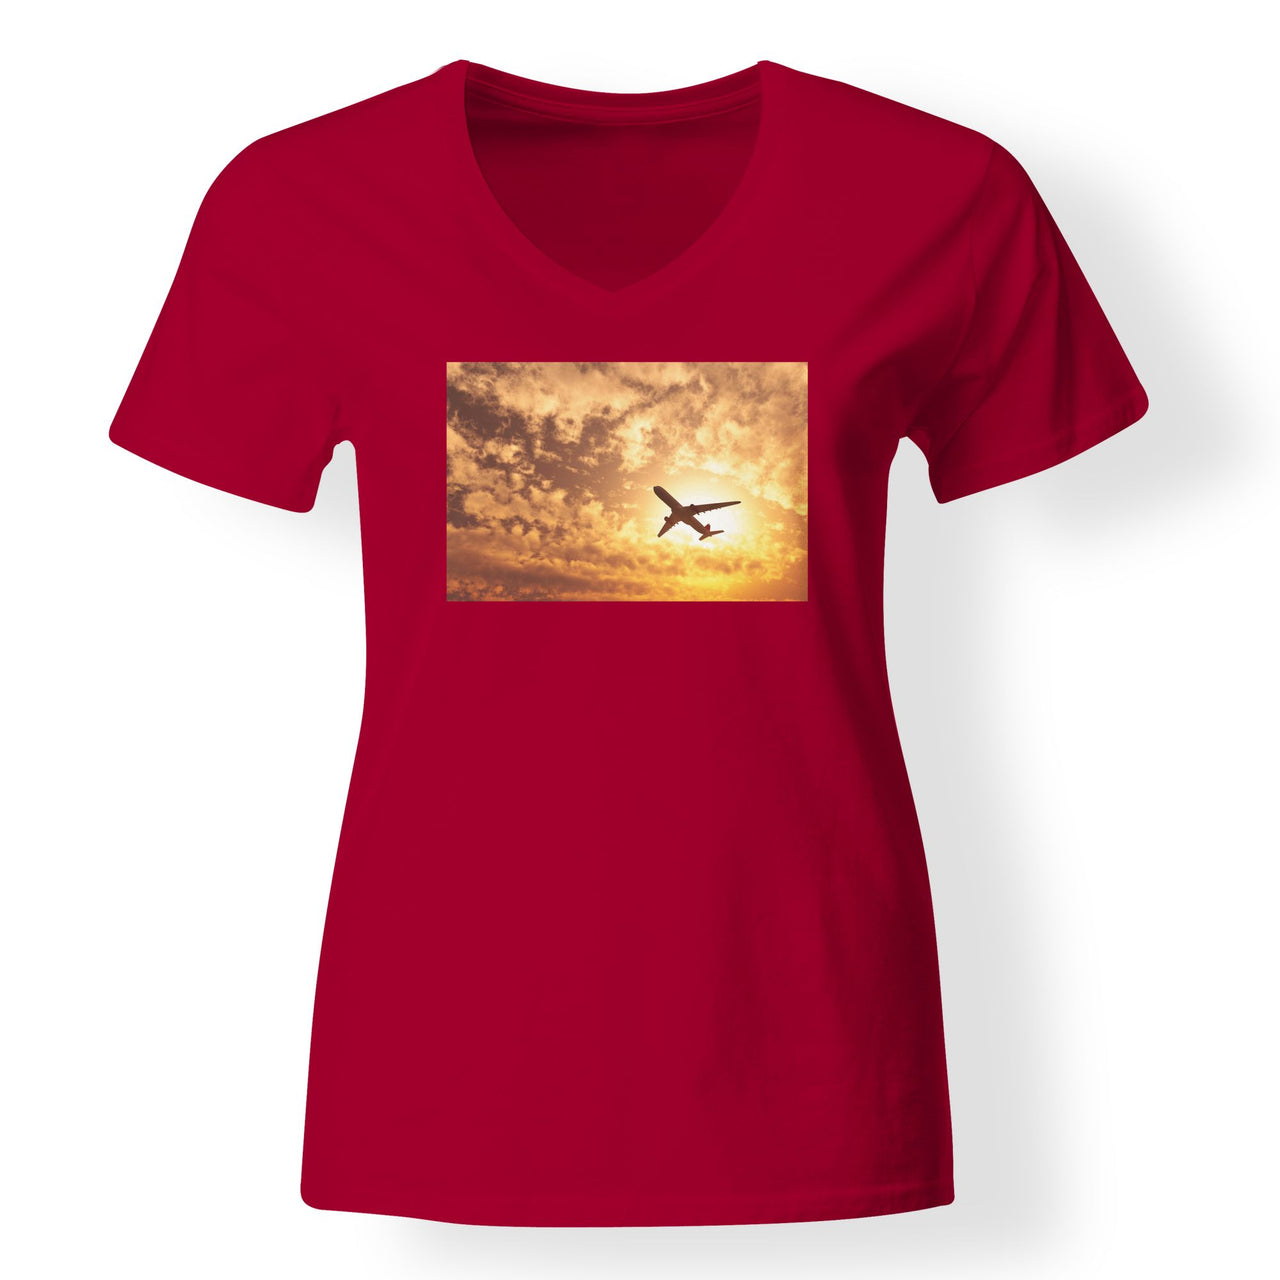 Plane Passing By Designed V-Neck T-Shirts